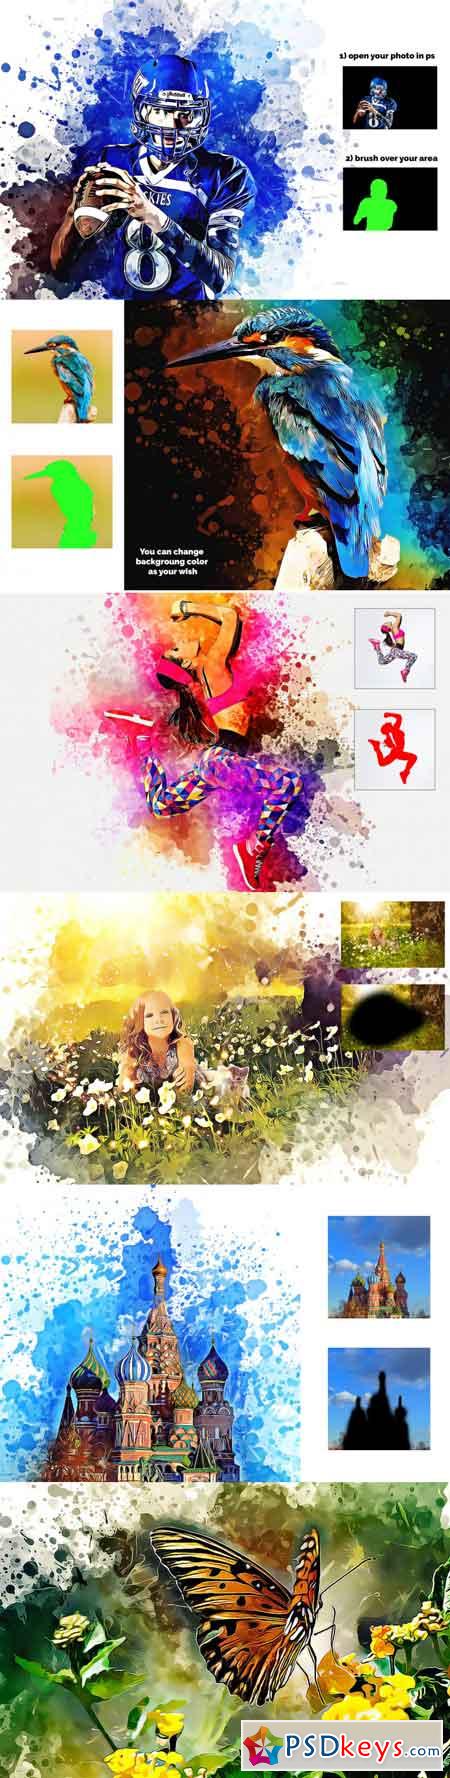 Watercolor Painting Photoshop Action 3365167